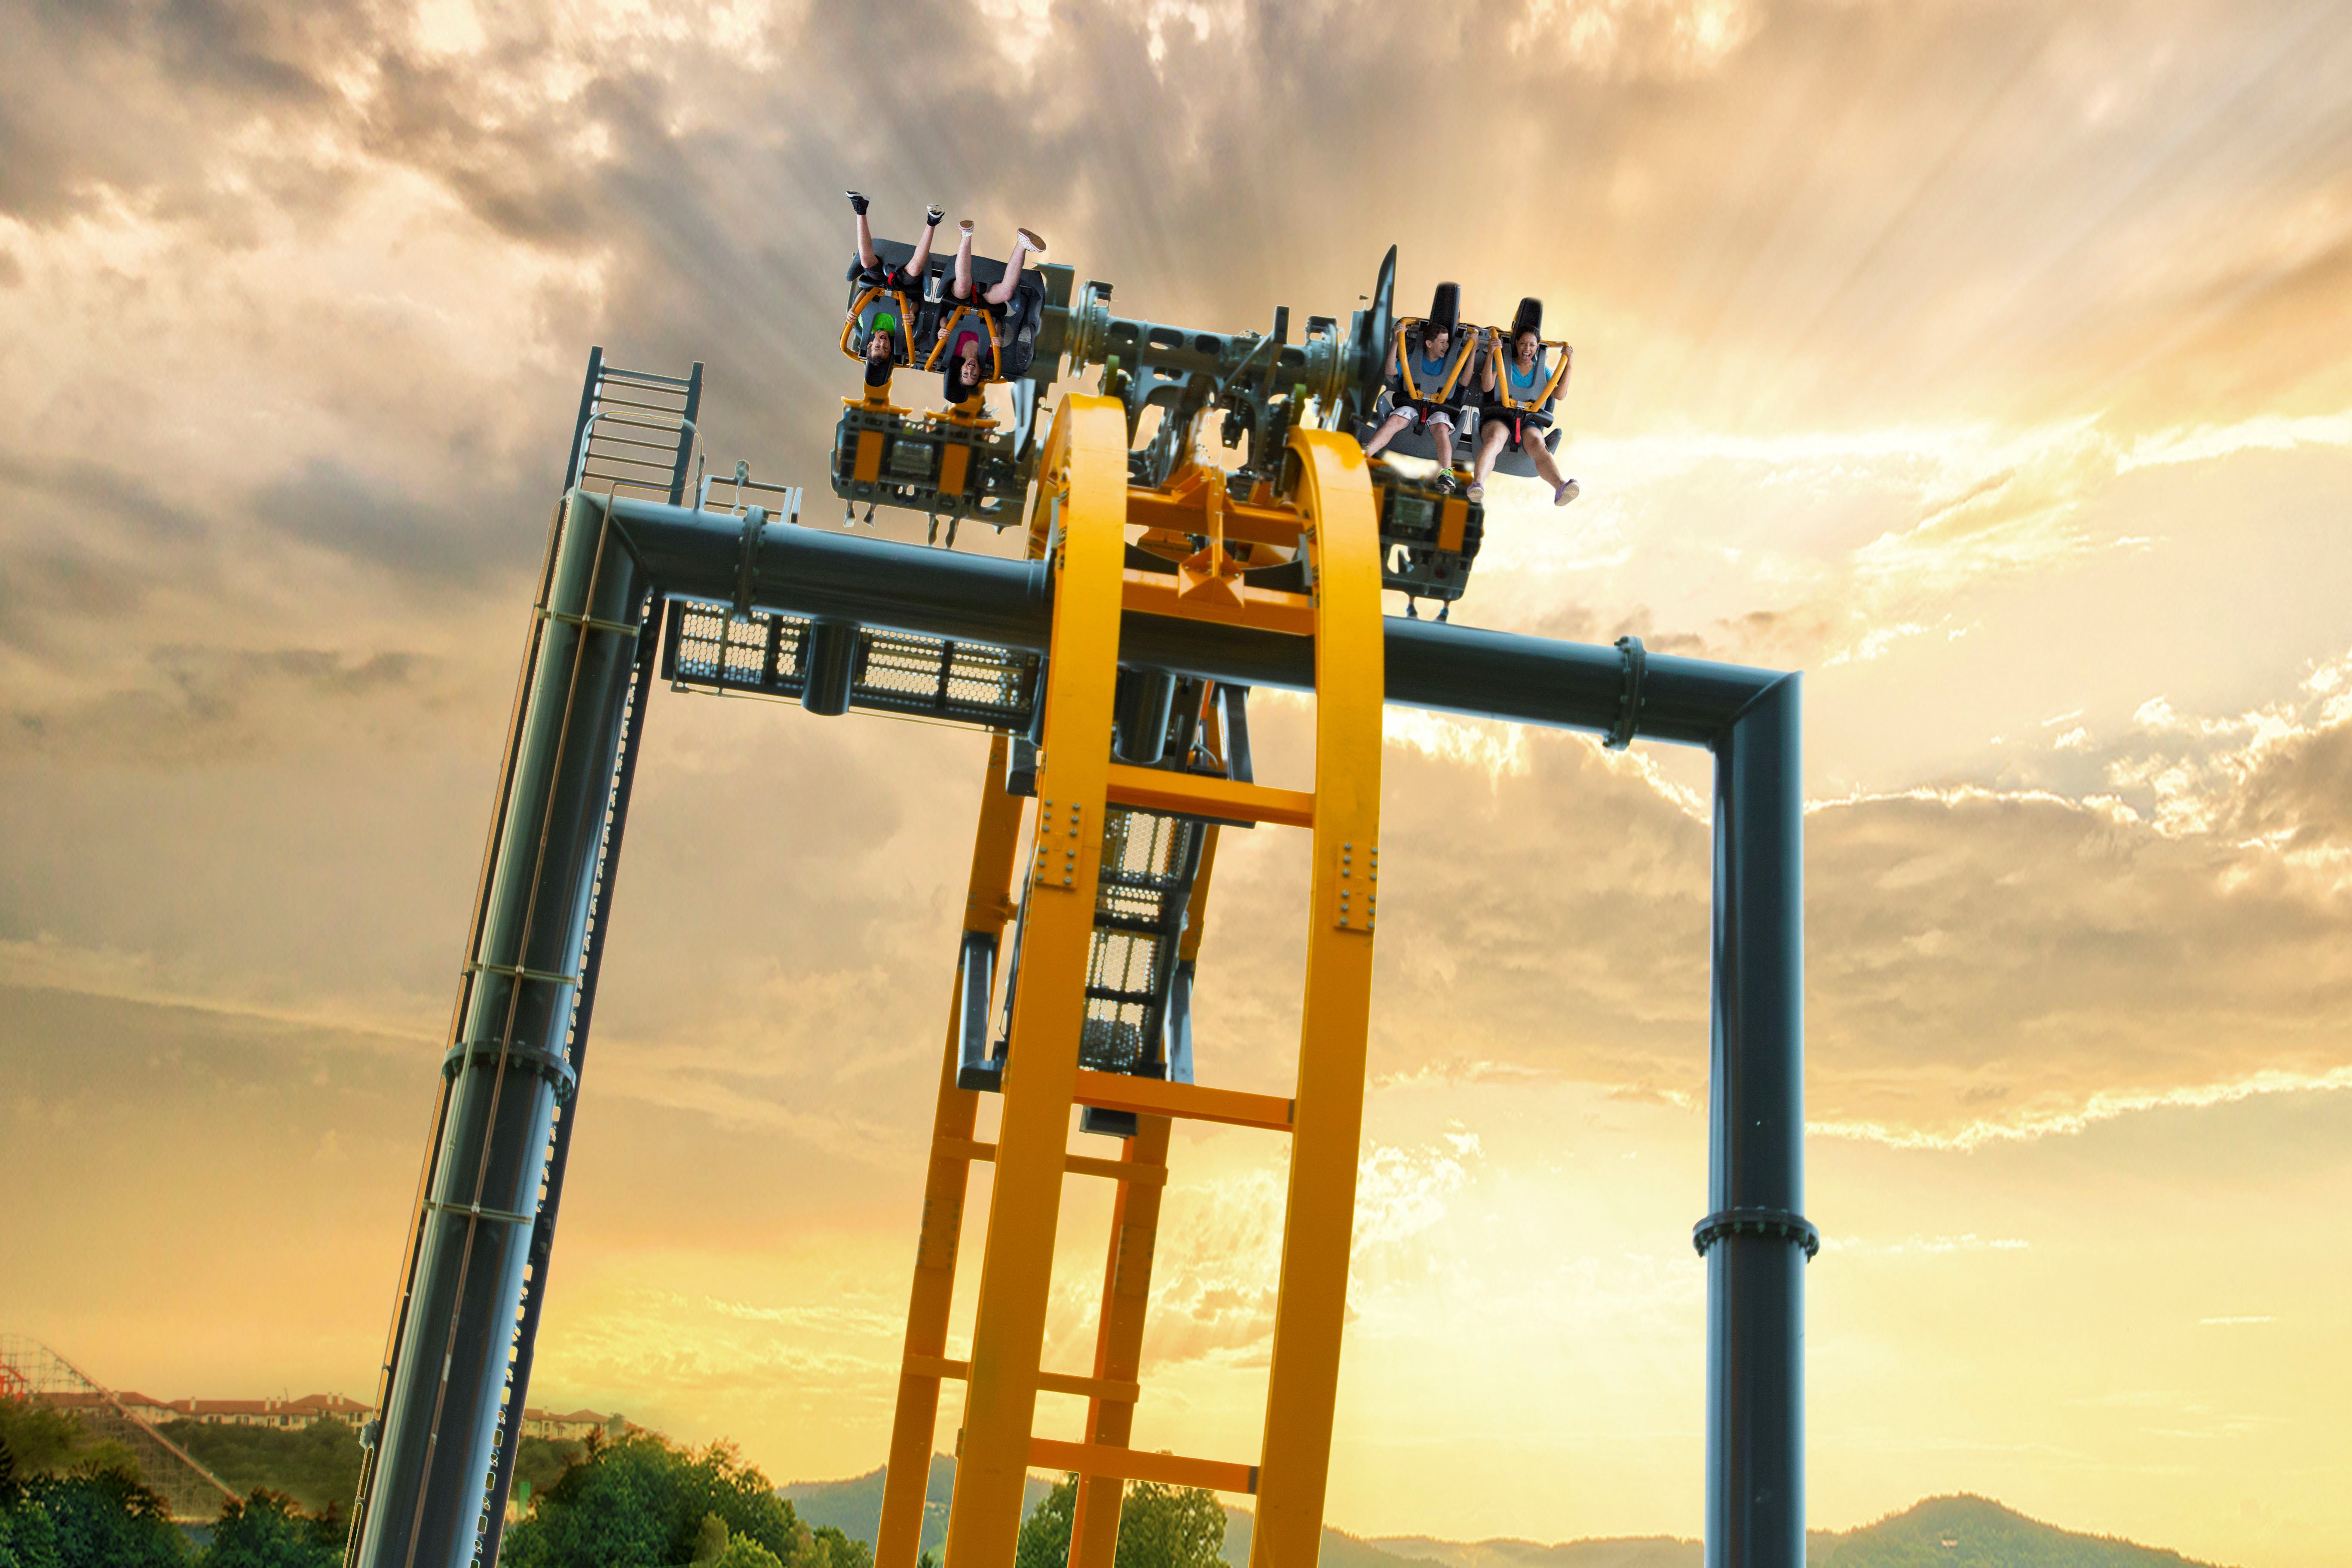 Patrons riding a rollercoaster at Six Flags Fiesta Texas